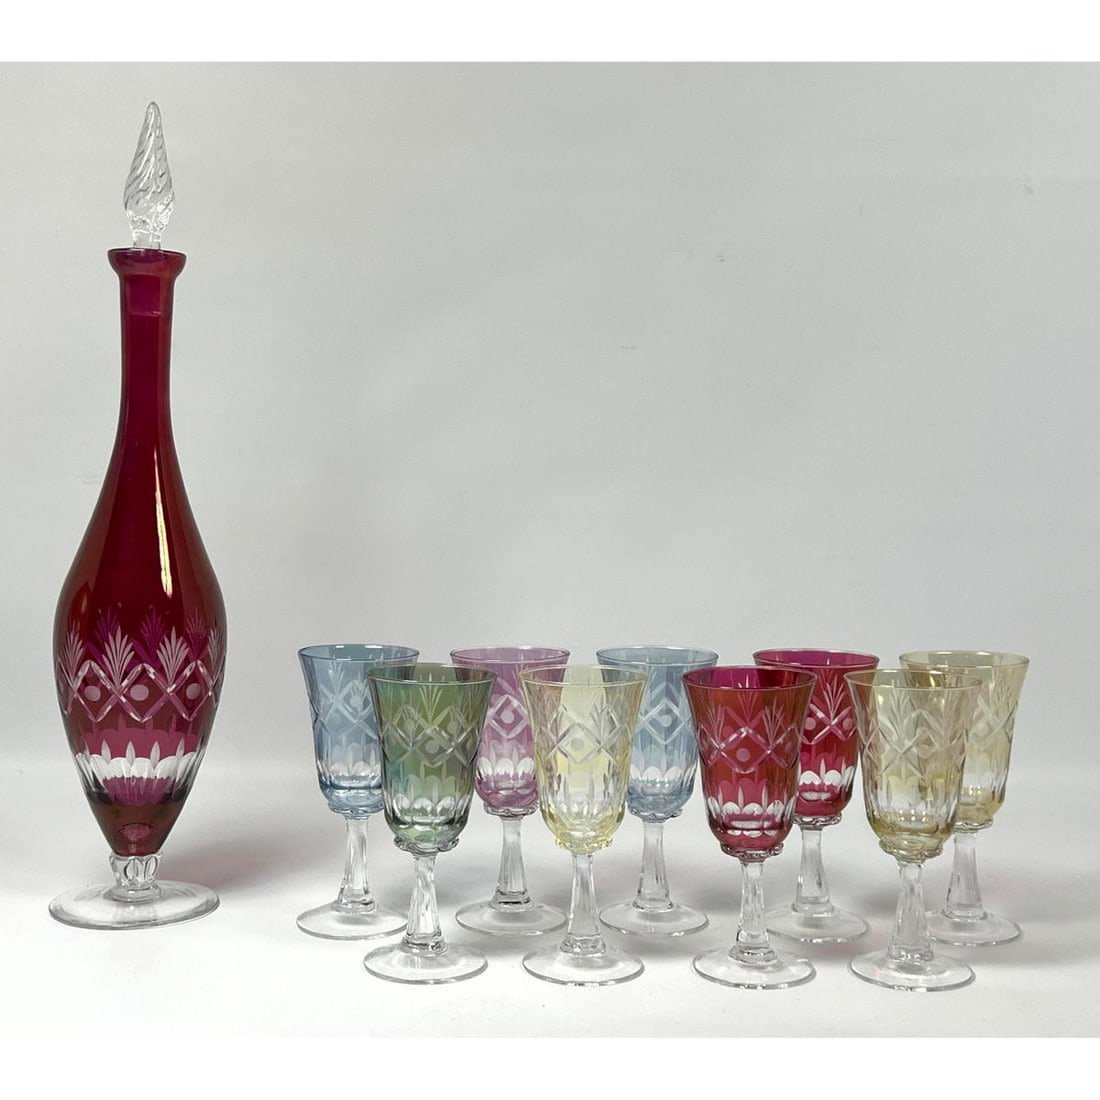 Colorful etched Decanter set with